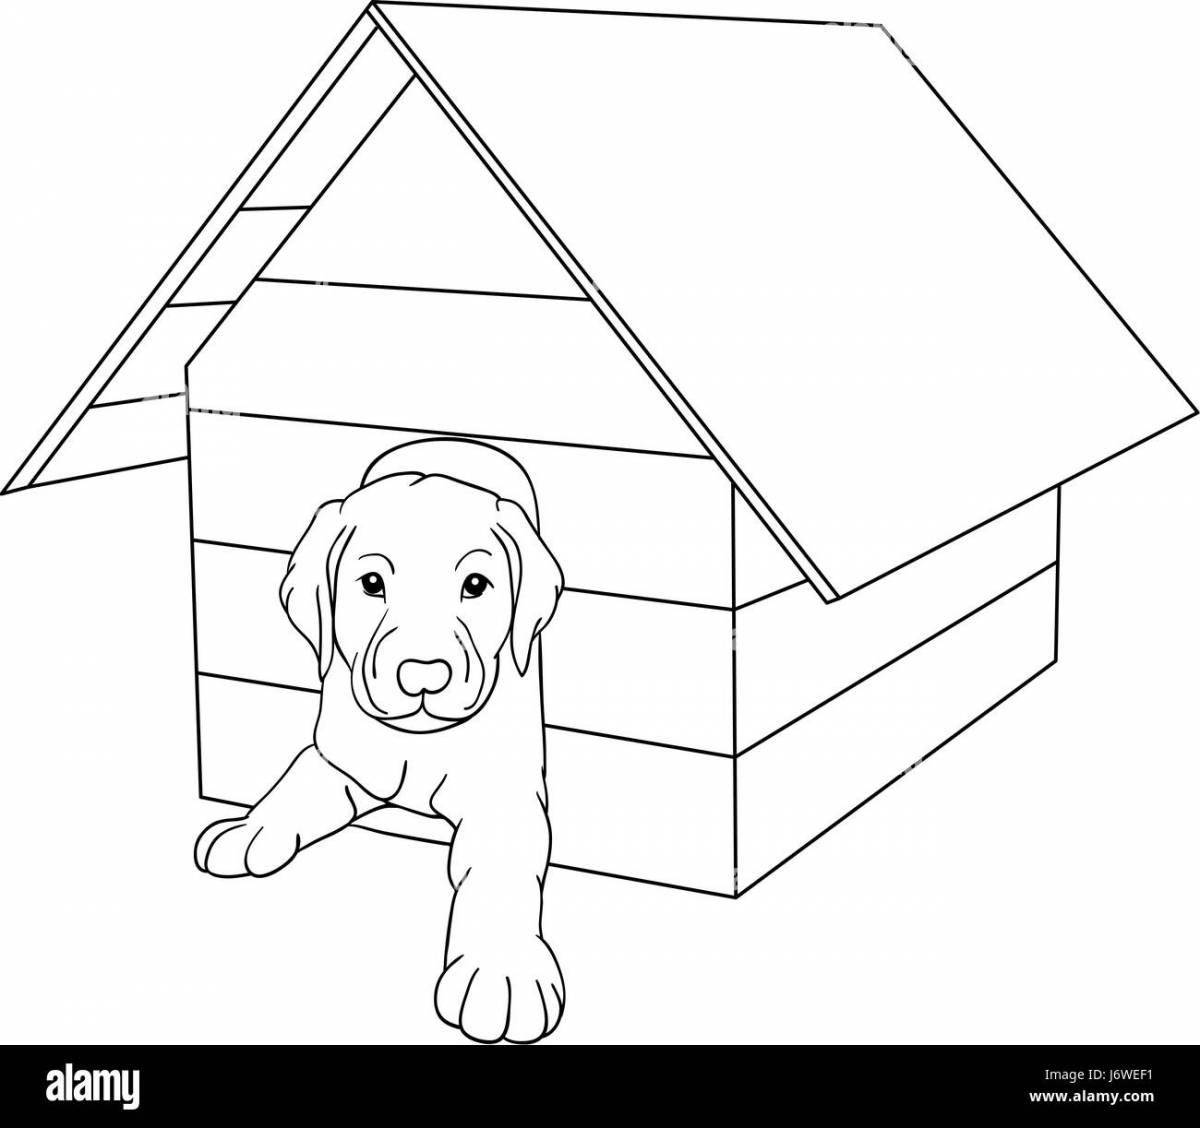 Coloring page cute dog house